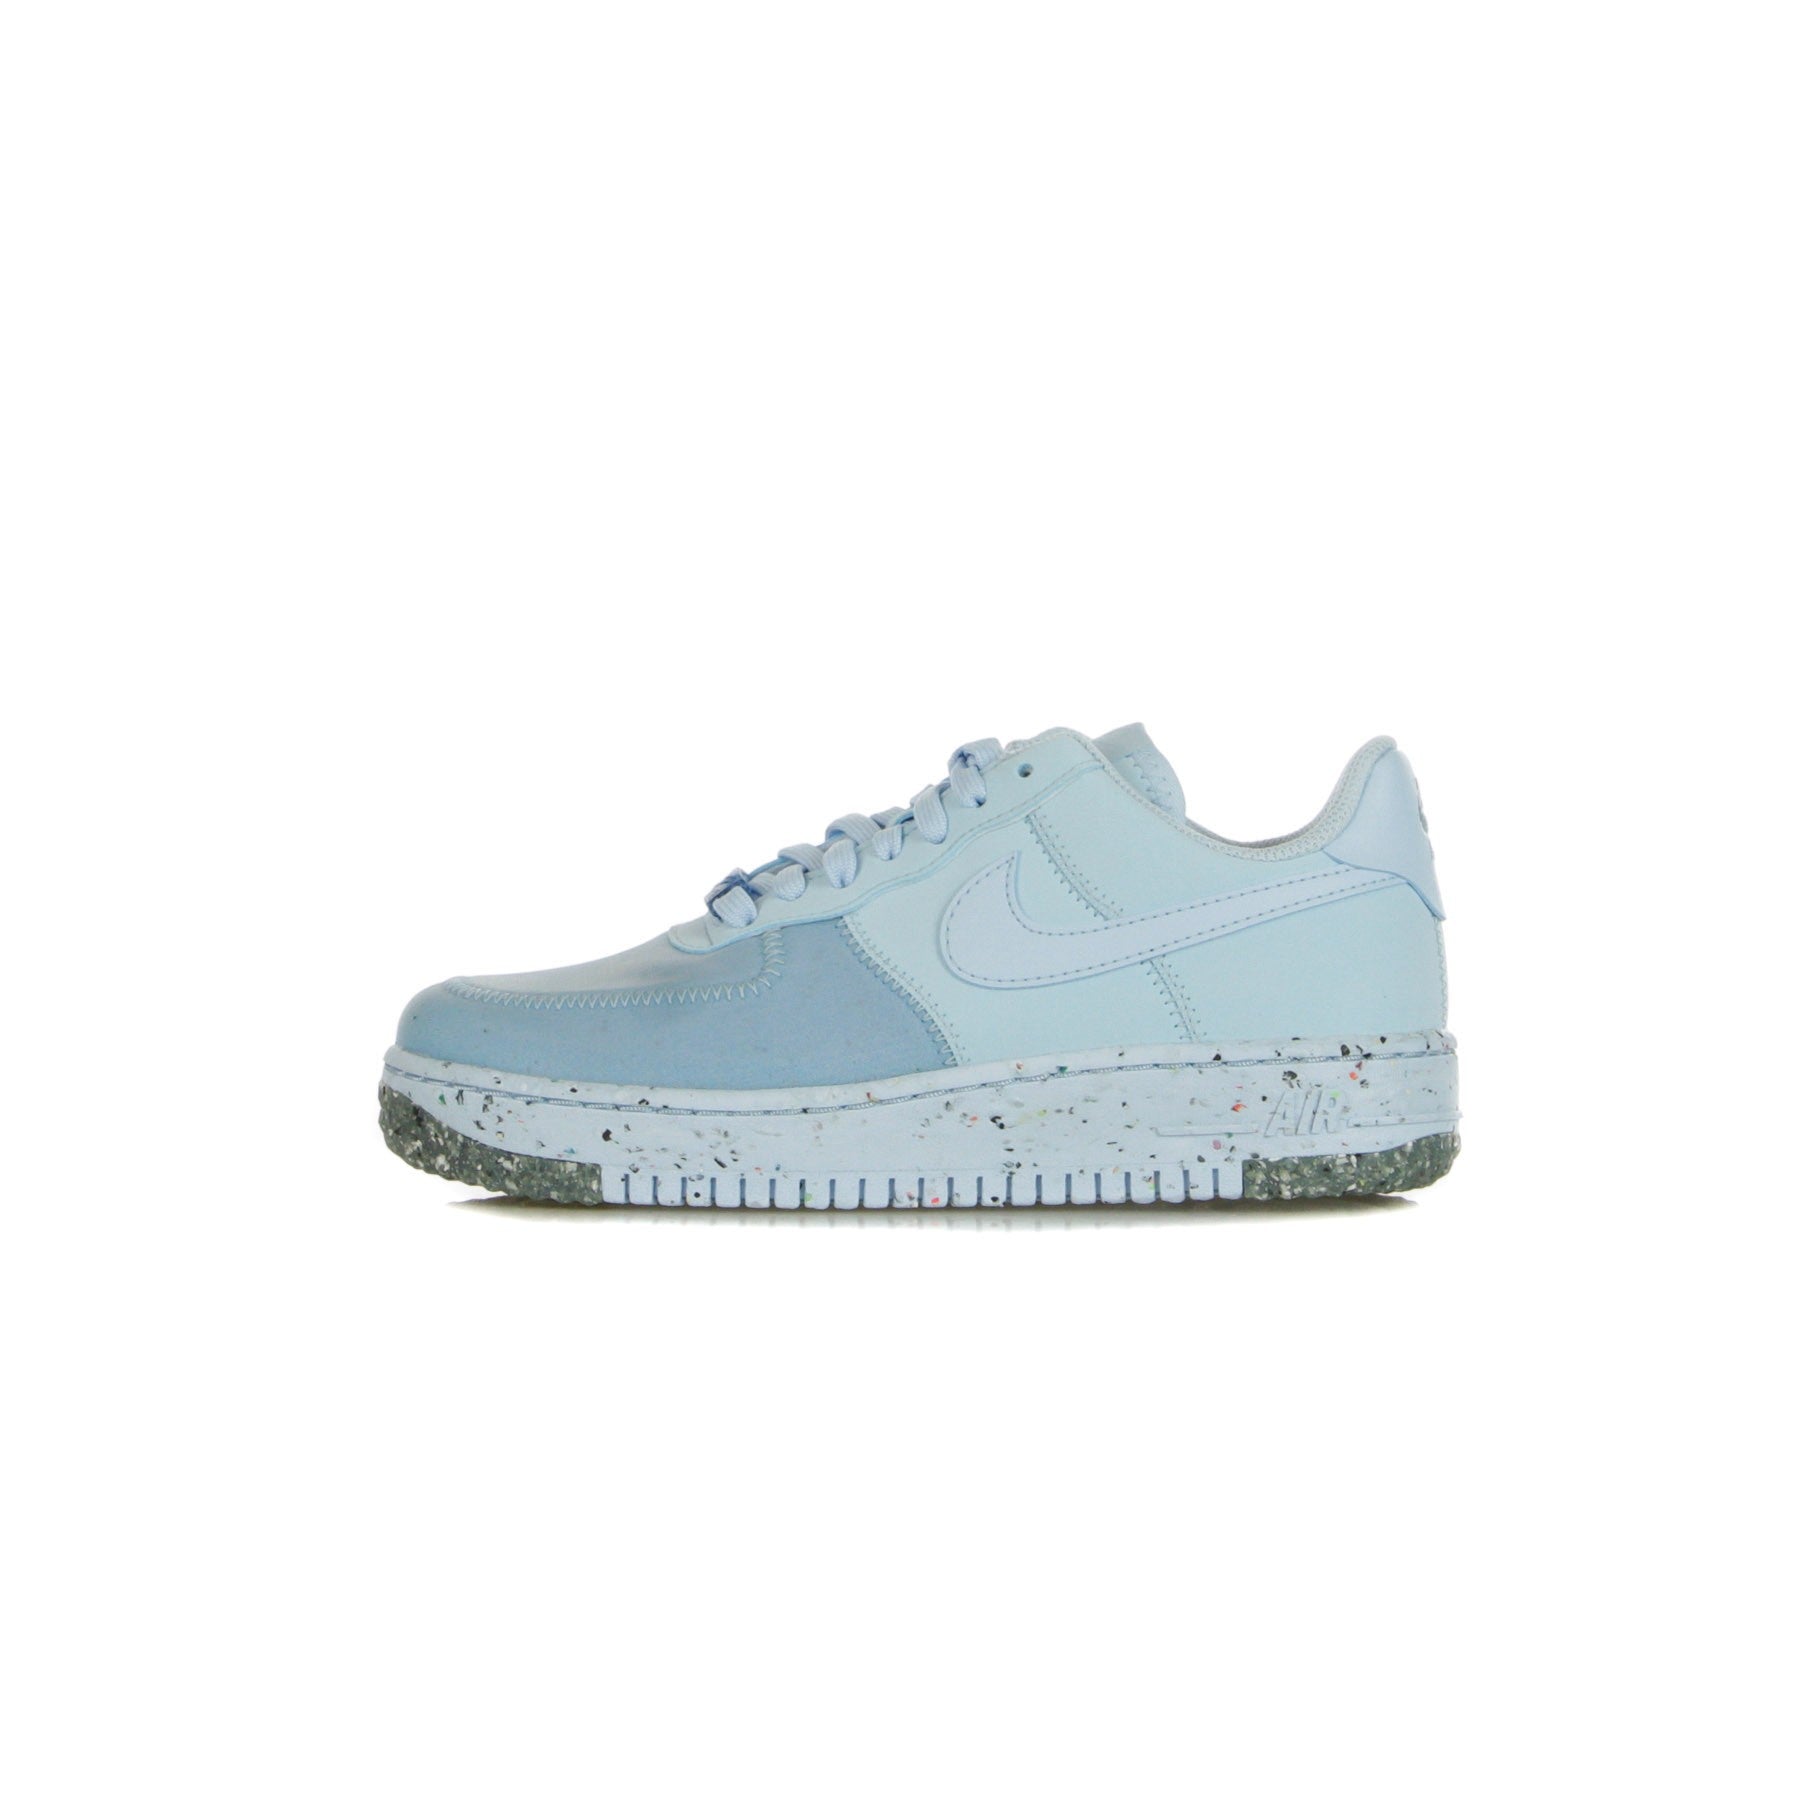 W Air Force 1 Crater Chambray Blue/chambray Blue Women's Low Shoe